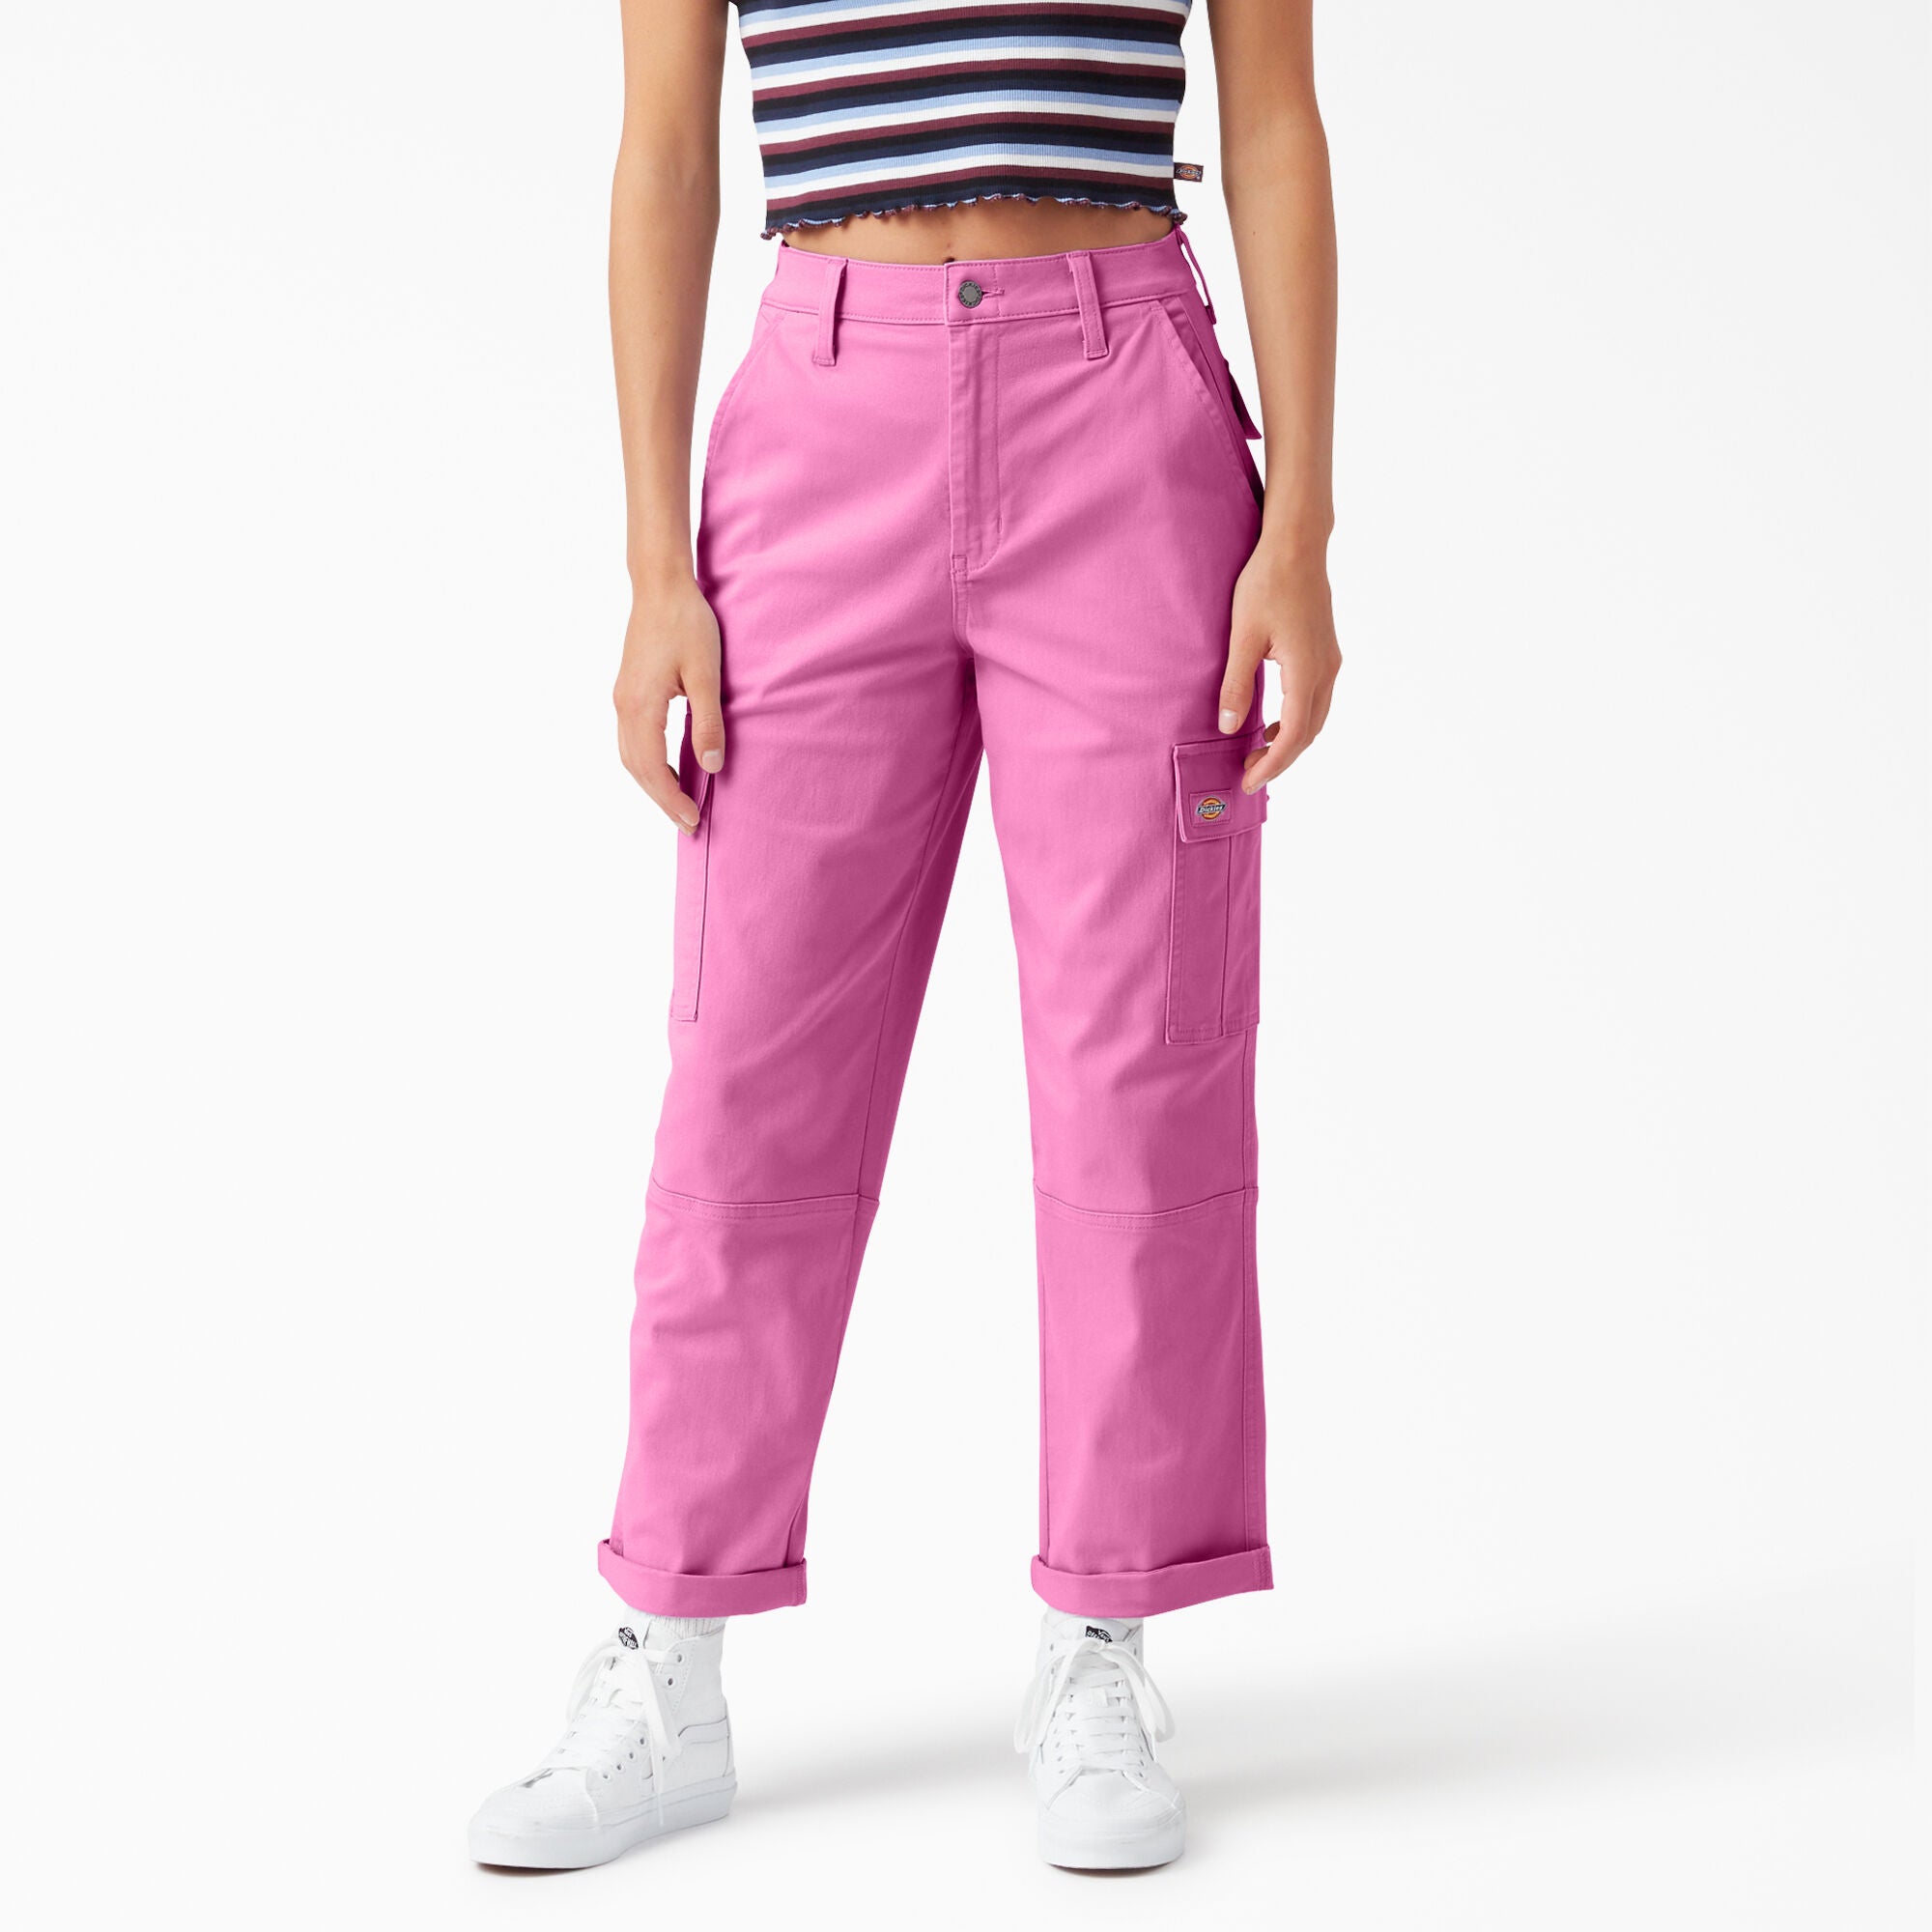 Dickies Women's Cropped Cargo Pants, Wild Rose - The Blue Ox 916